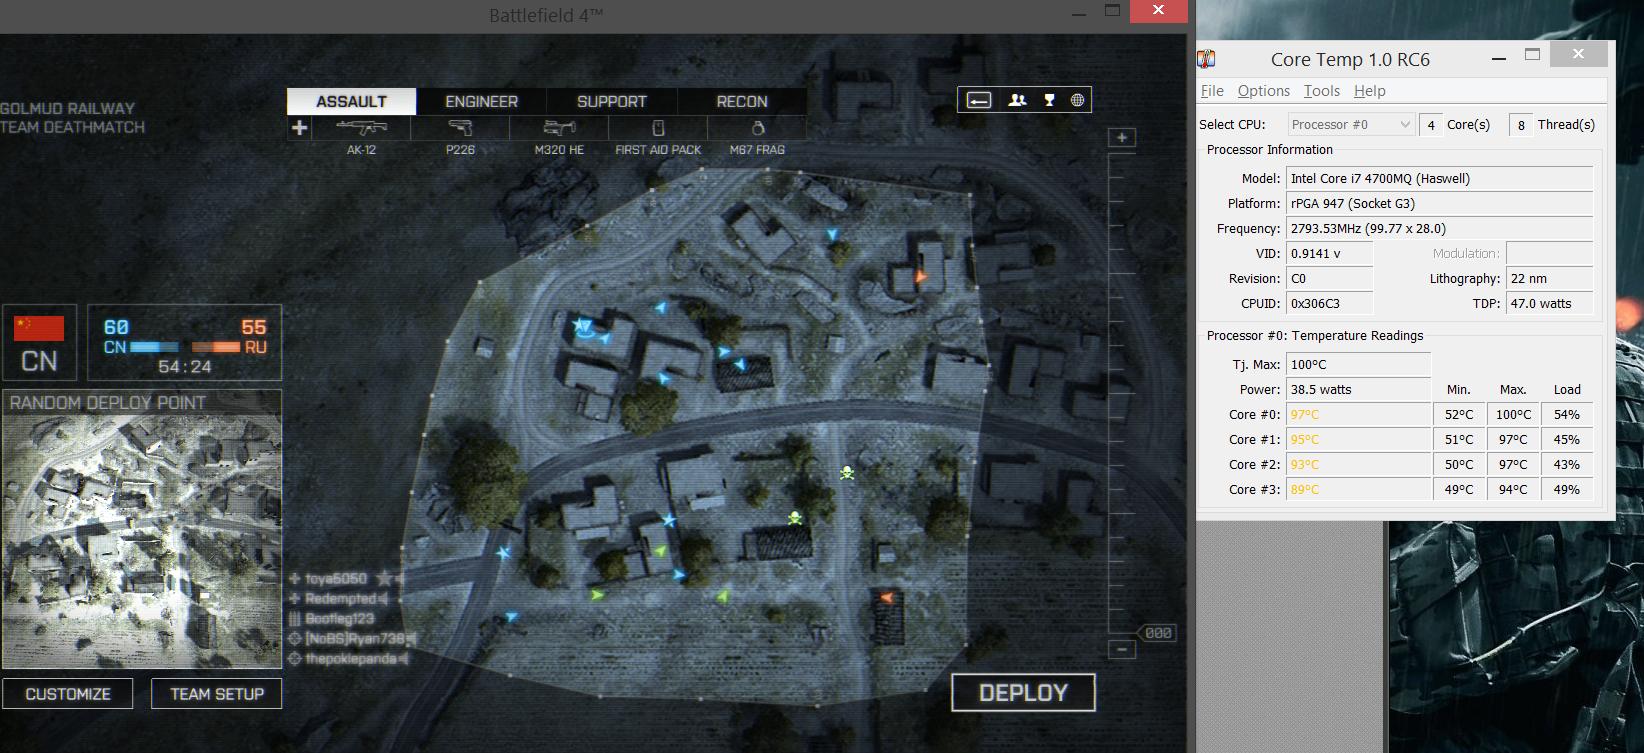 Screenshot of Battlefield 4 and temperatures showing around 95 degrees celsius for each core.